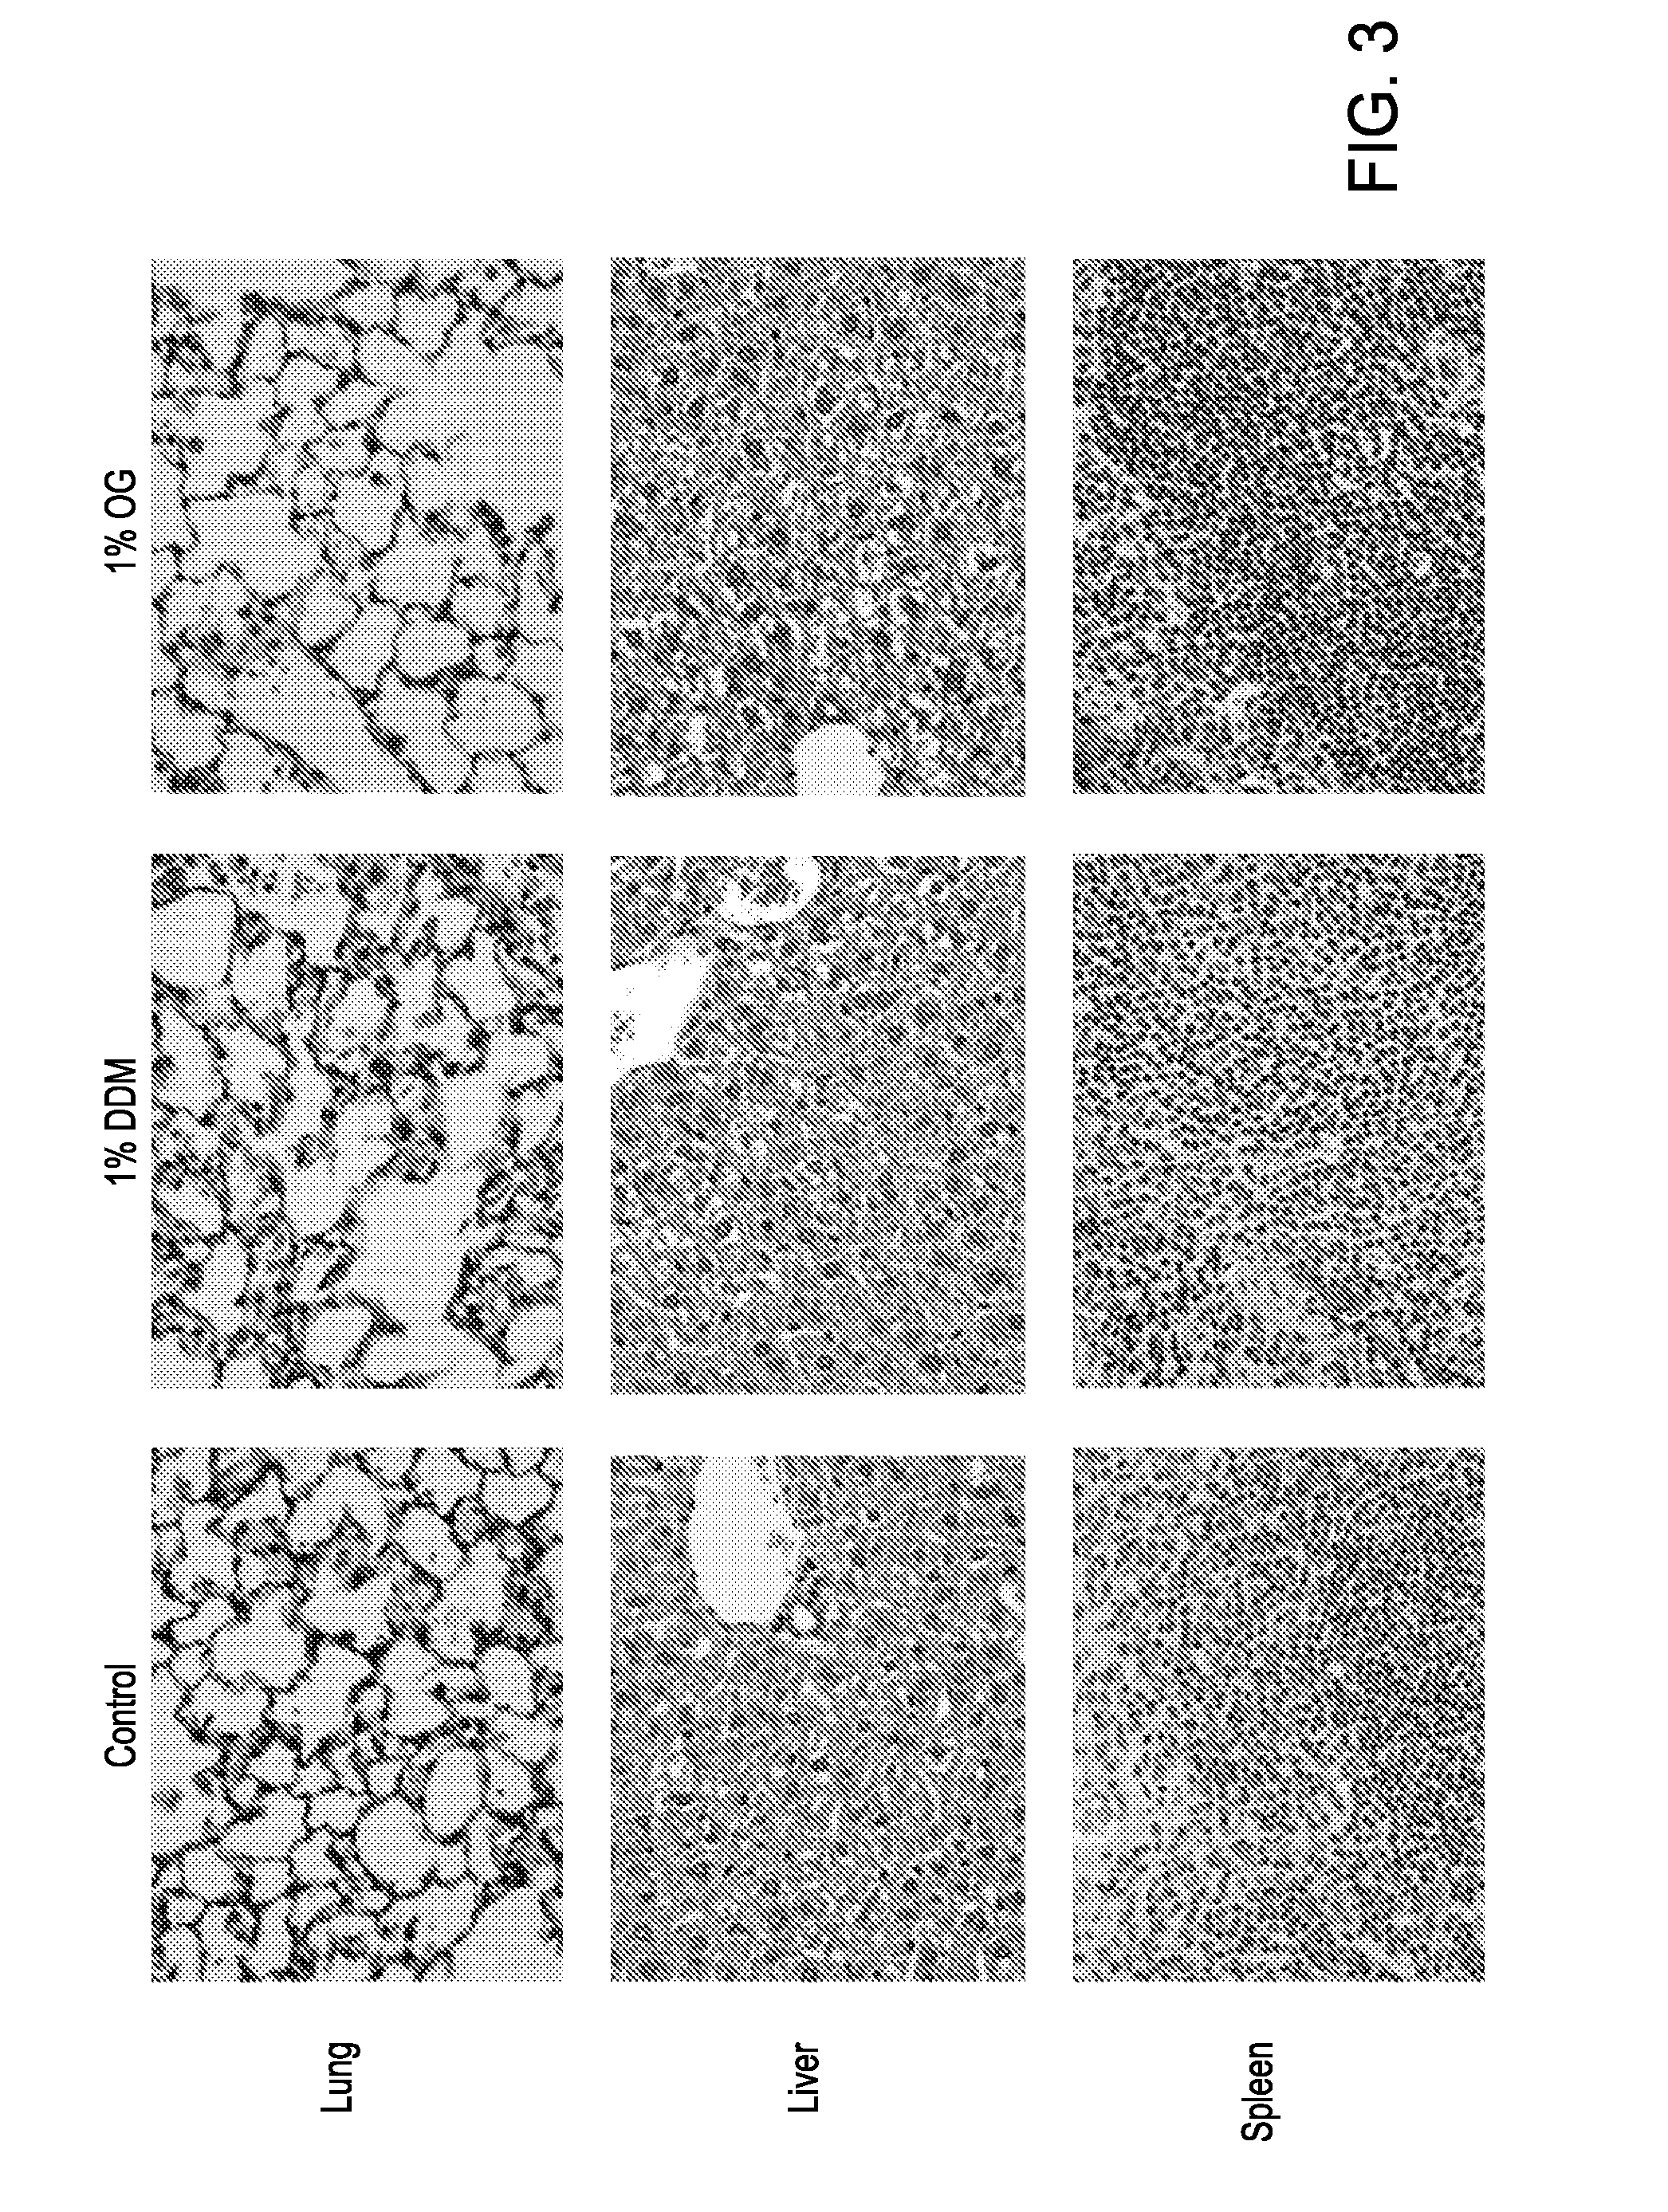 Compositions and methods for treating mycobacterial infections